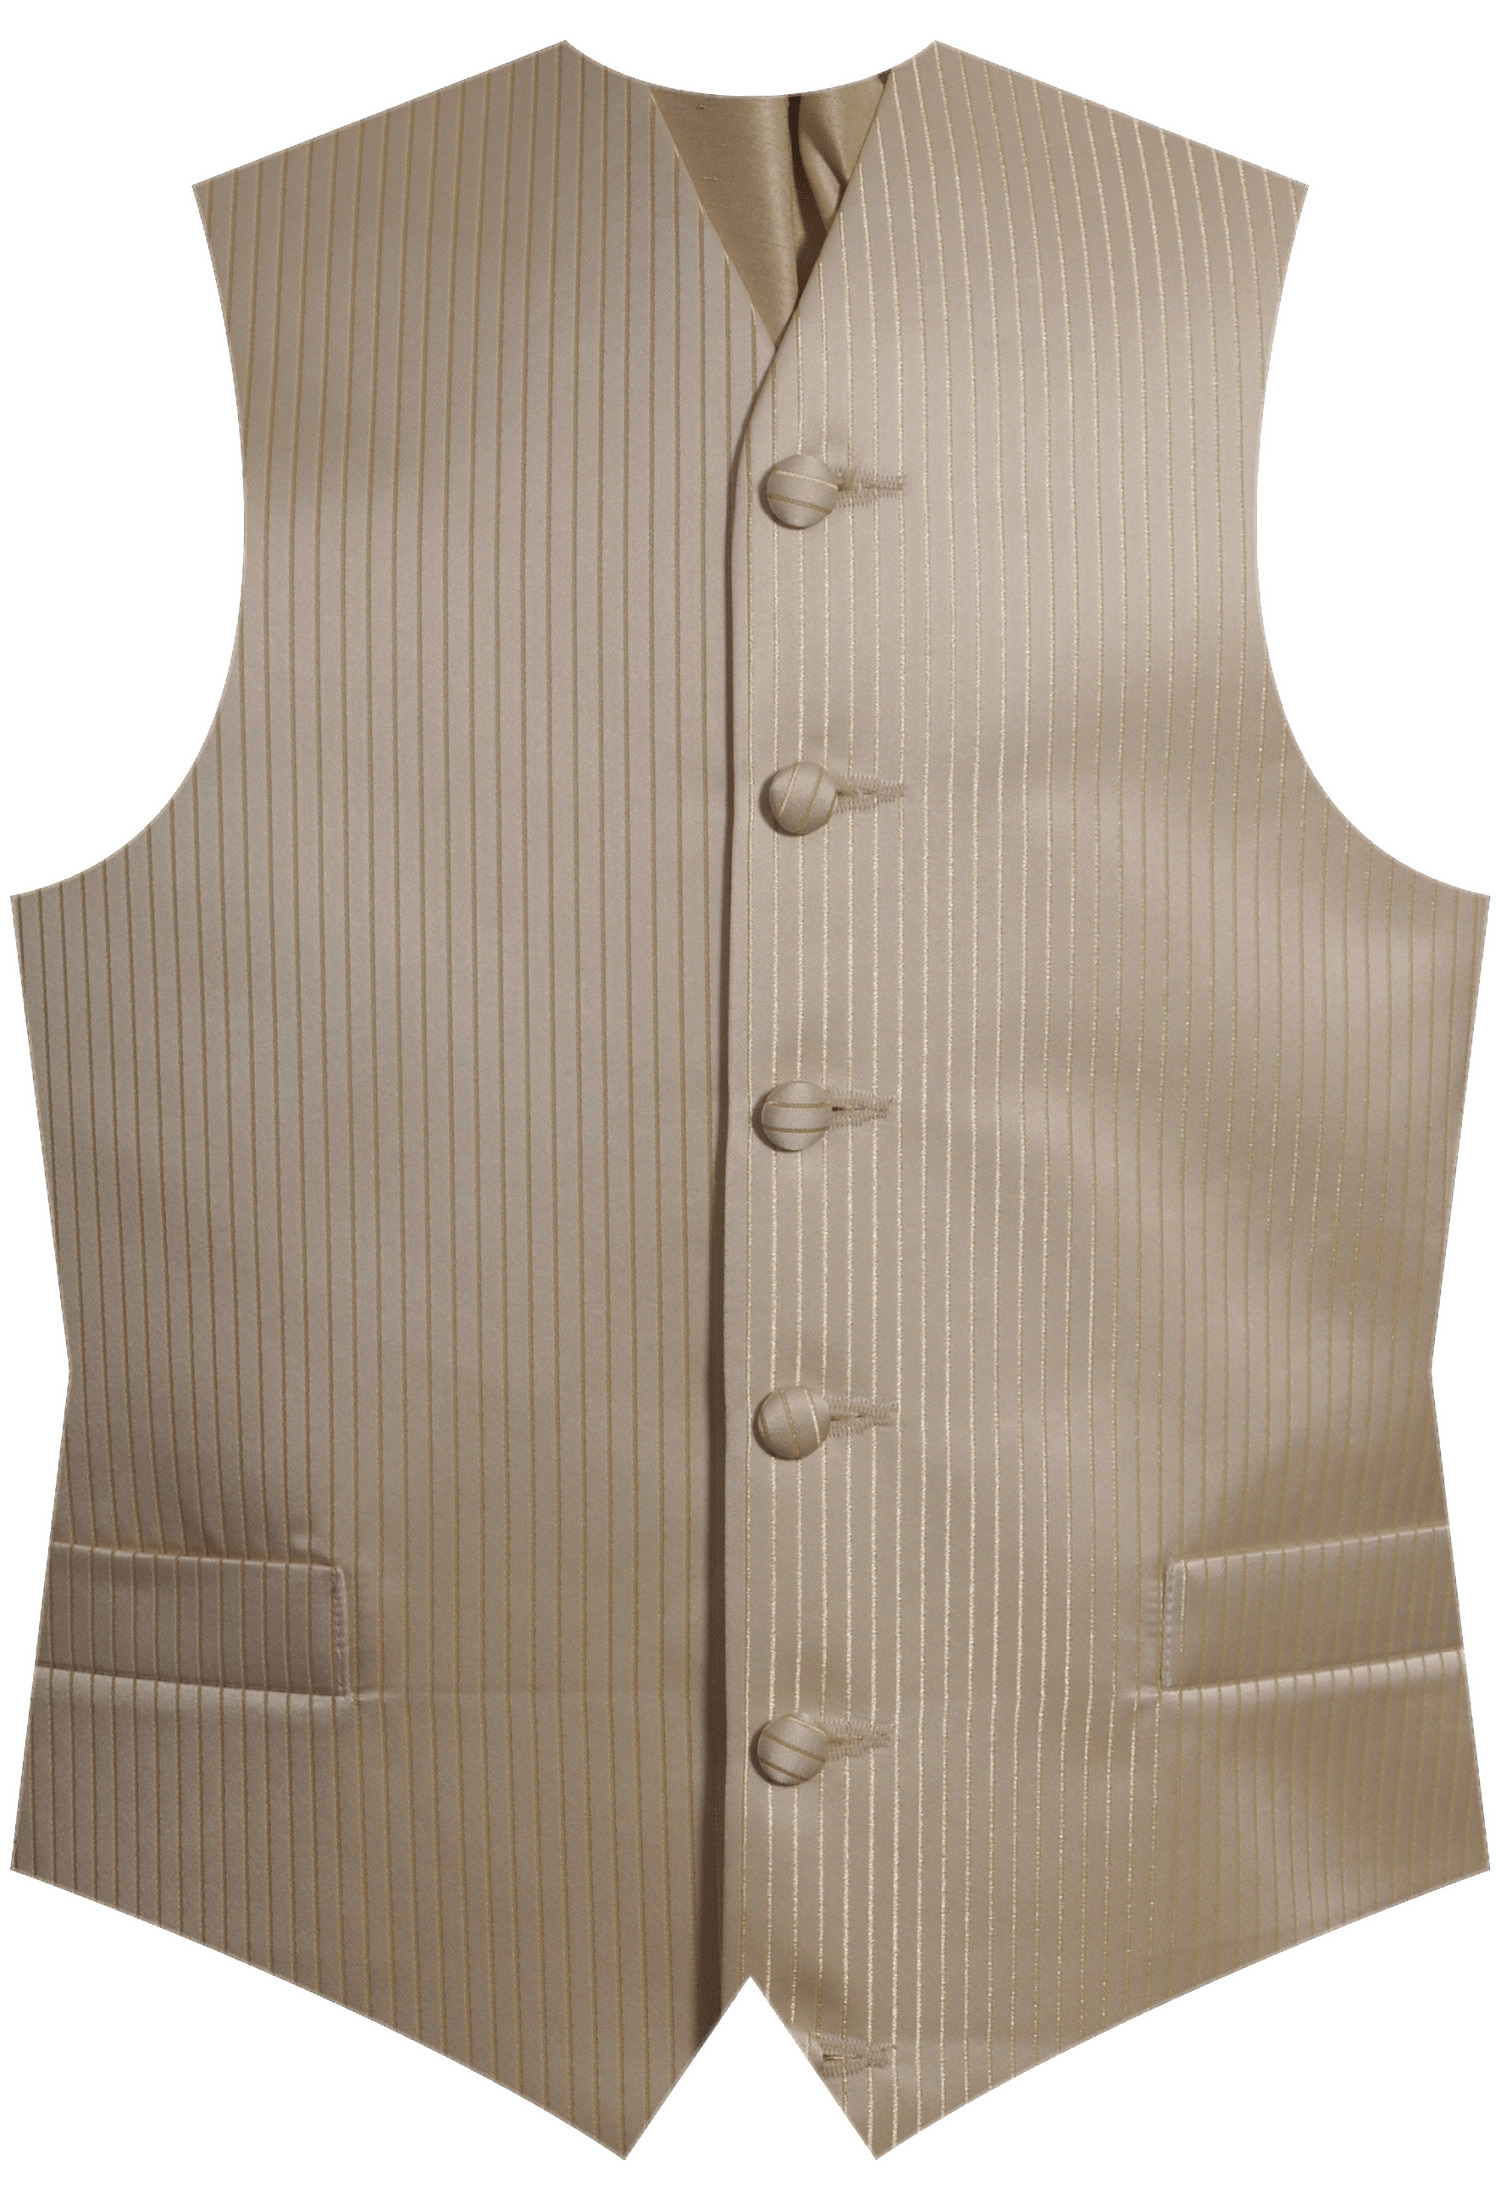 Wedding Waistcoat With Closed Buttons icons